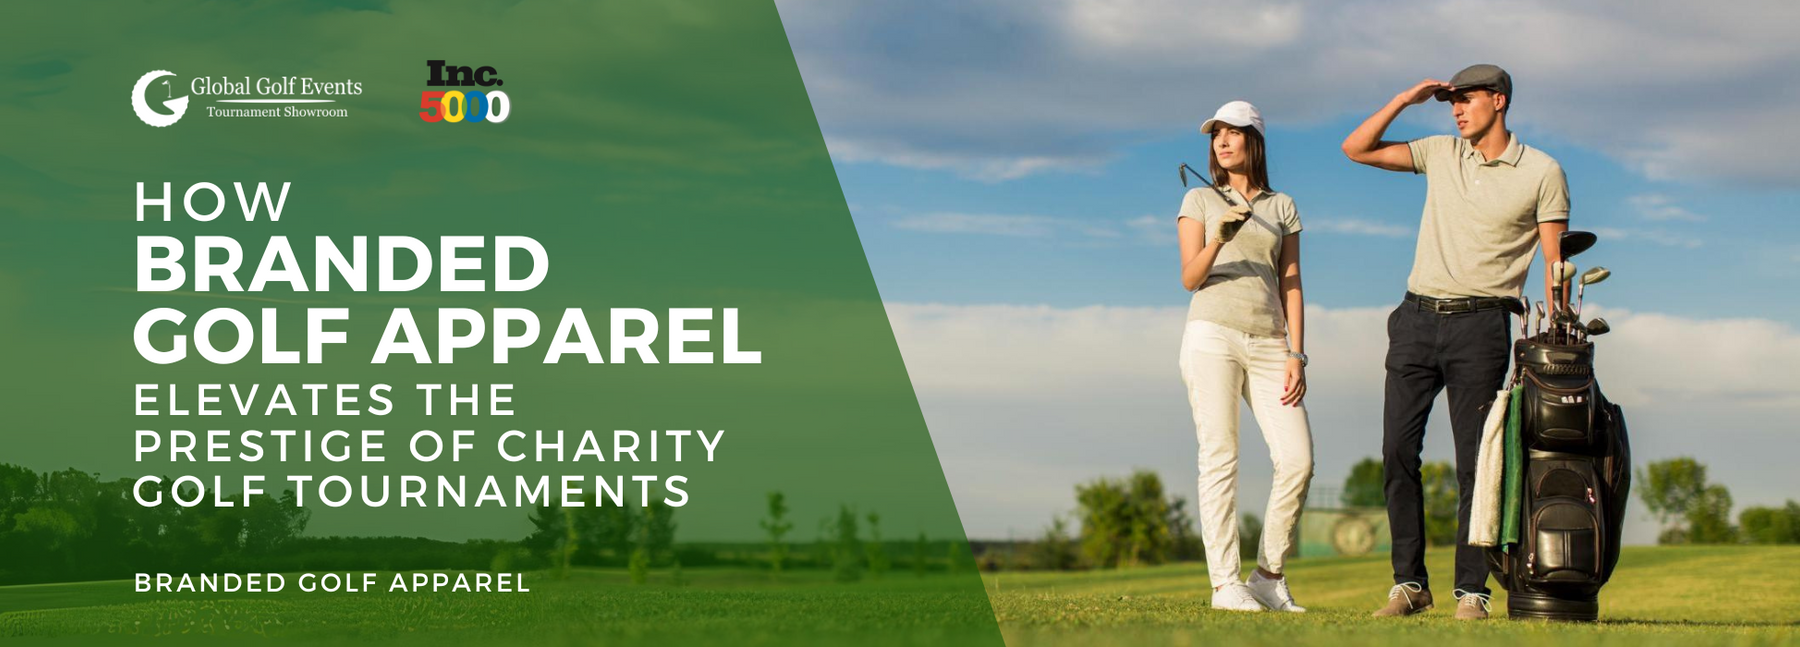 How Branded Golf Apparel Elevates the Prestige of Charity Golf Tournaments